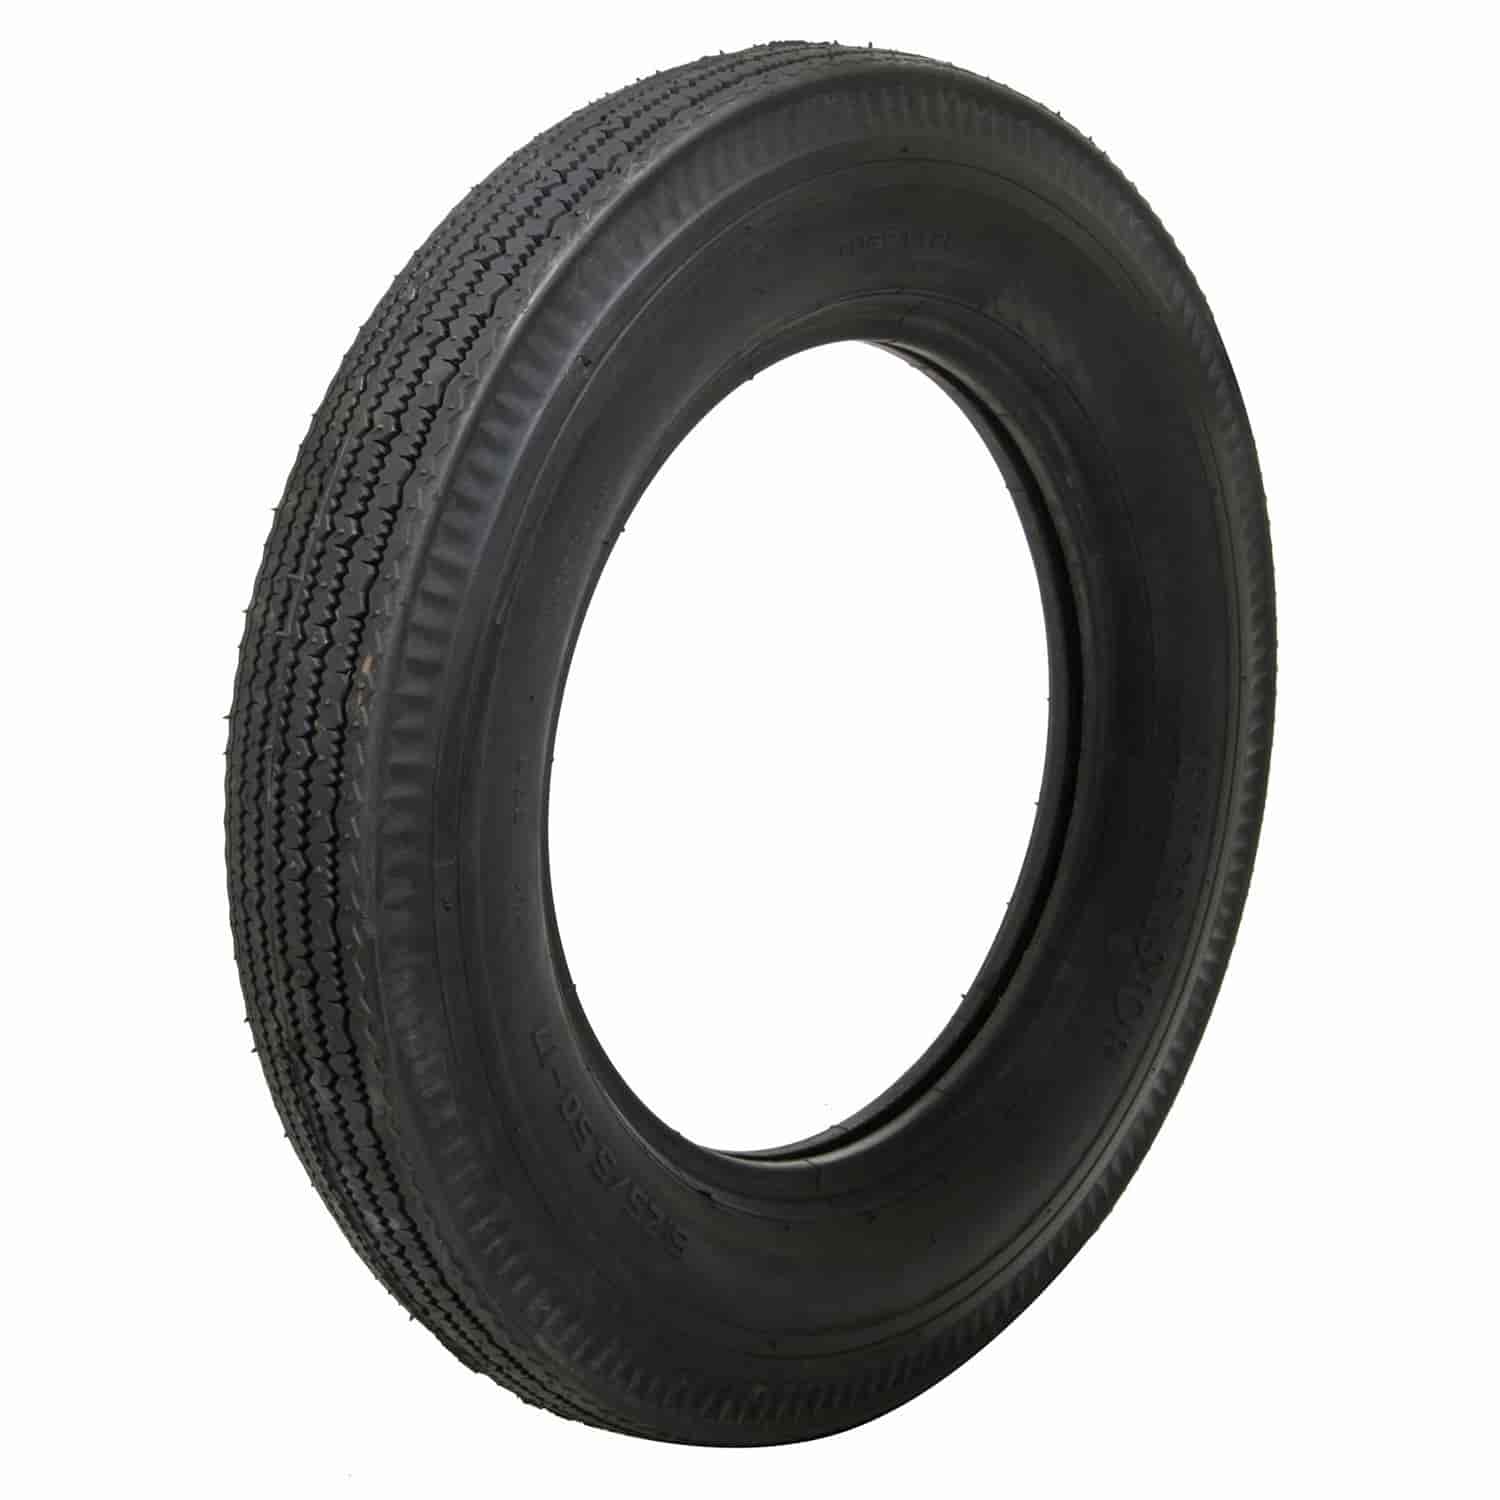 Excelsior Bias Ply Tire 525/550-17 [Blackwall]